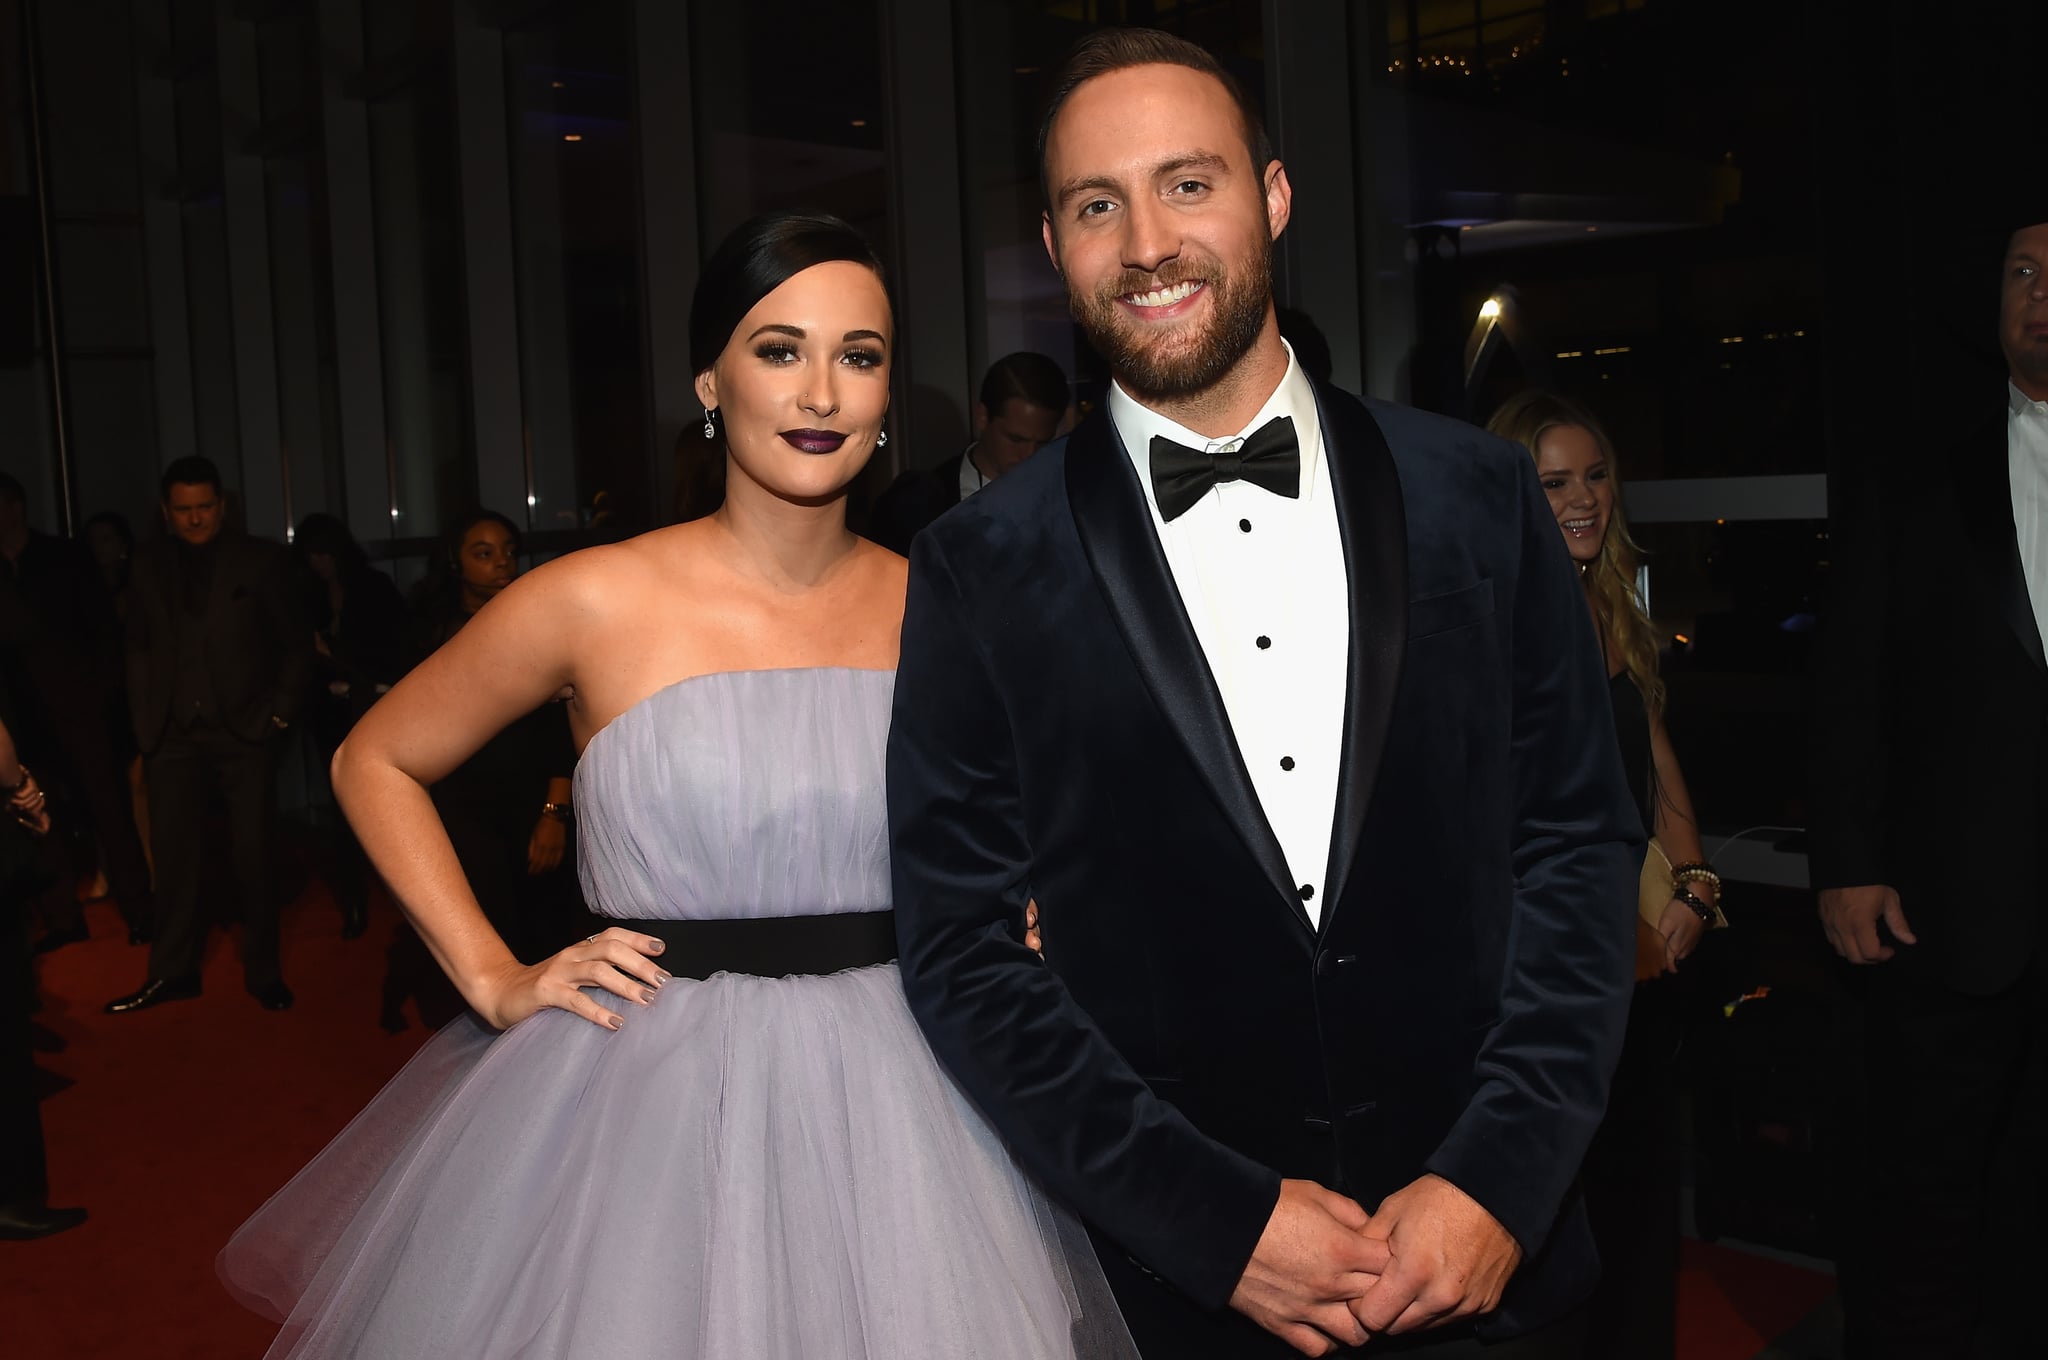 NASHVILLE, TN - NOVEMBER 02:  Kacey Musgraves and Ruston Kelly attend the 50th annual CMA Awards at the Bridgestone Arena on November 2, 2016 in Nashville, Tennessee.  (Photo by Rick Diamond/Getty Images)